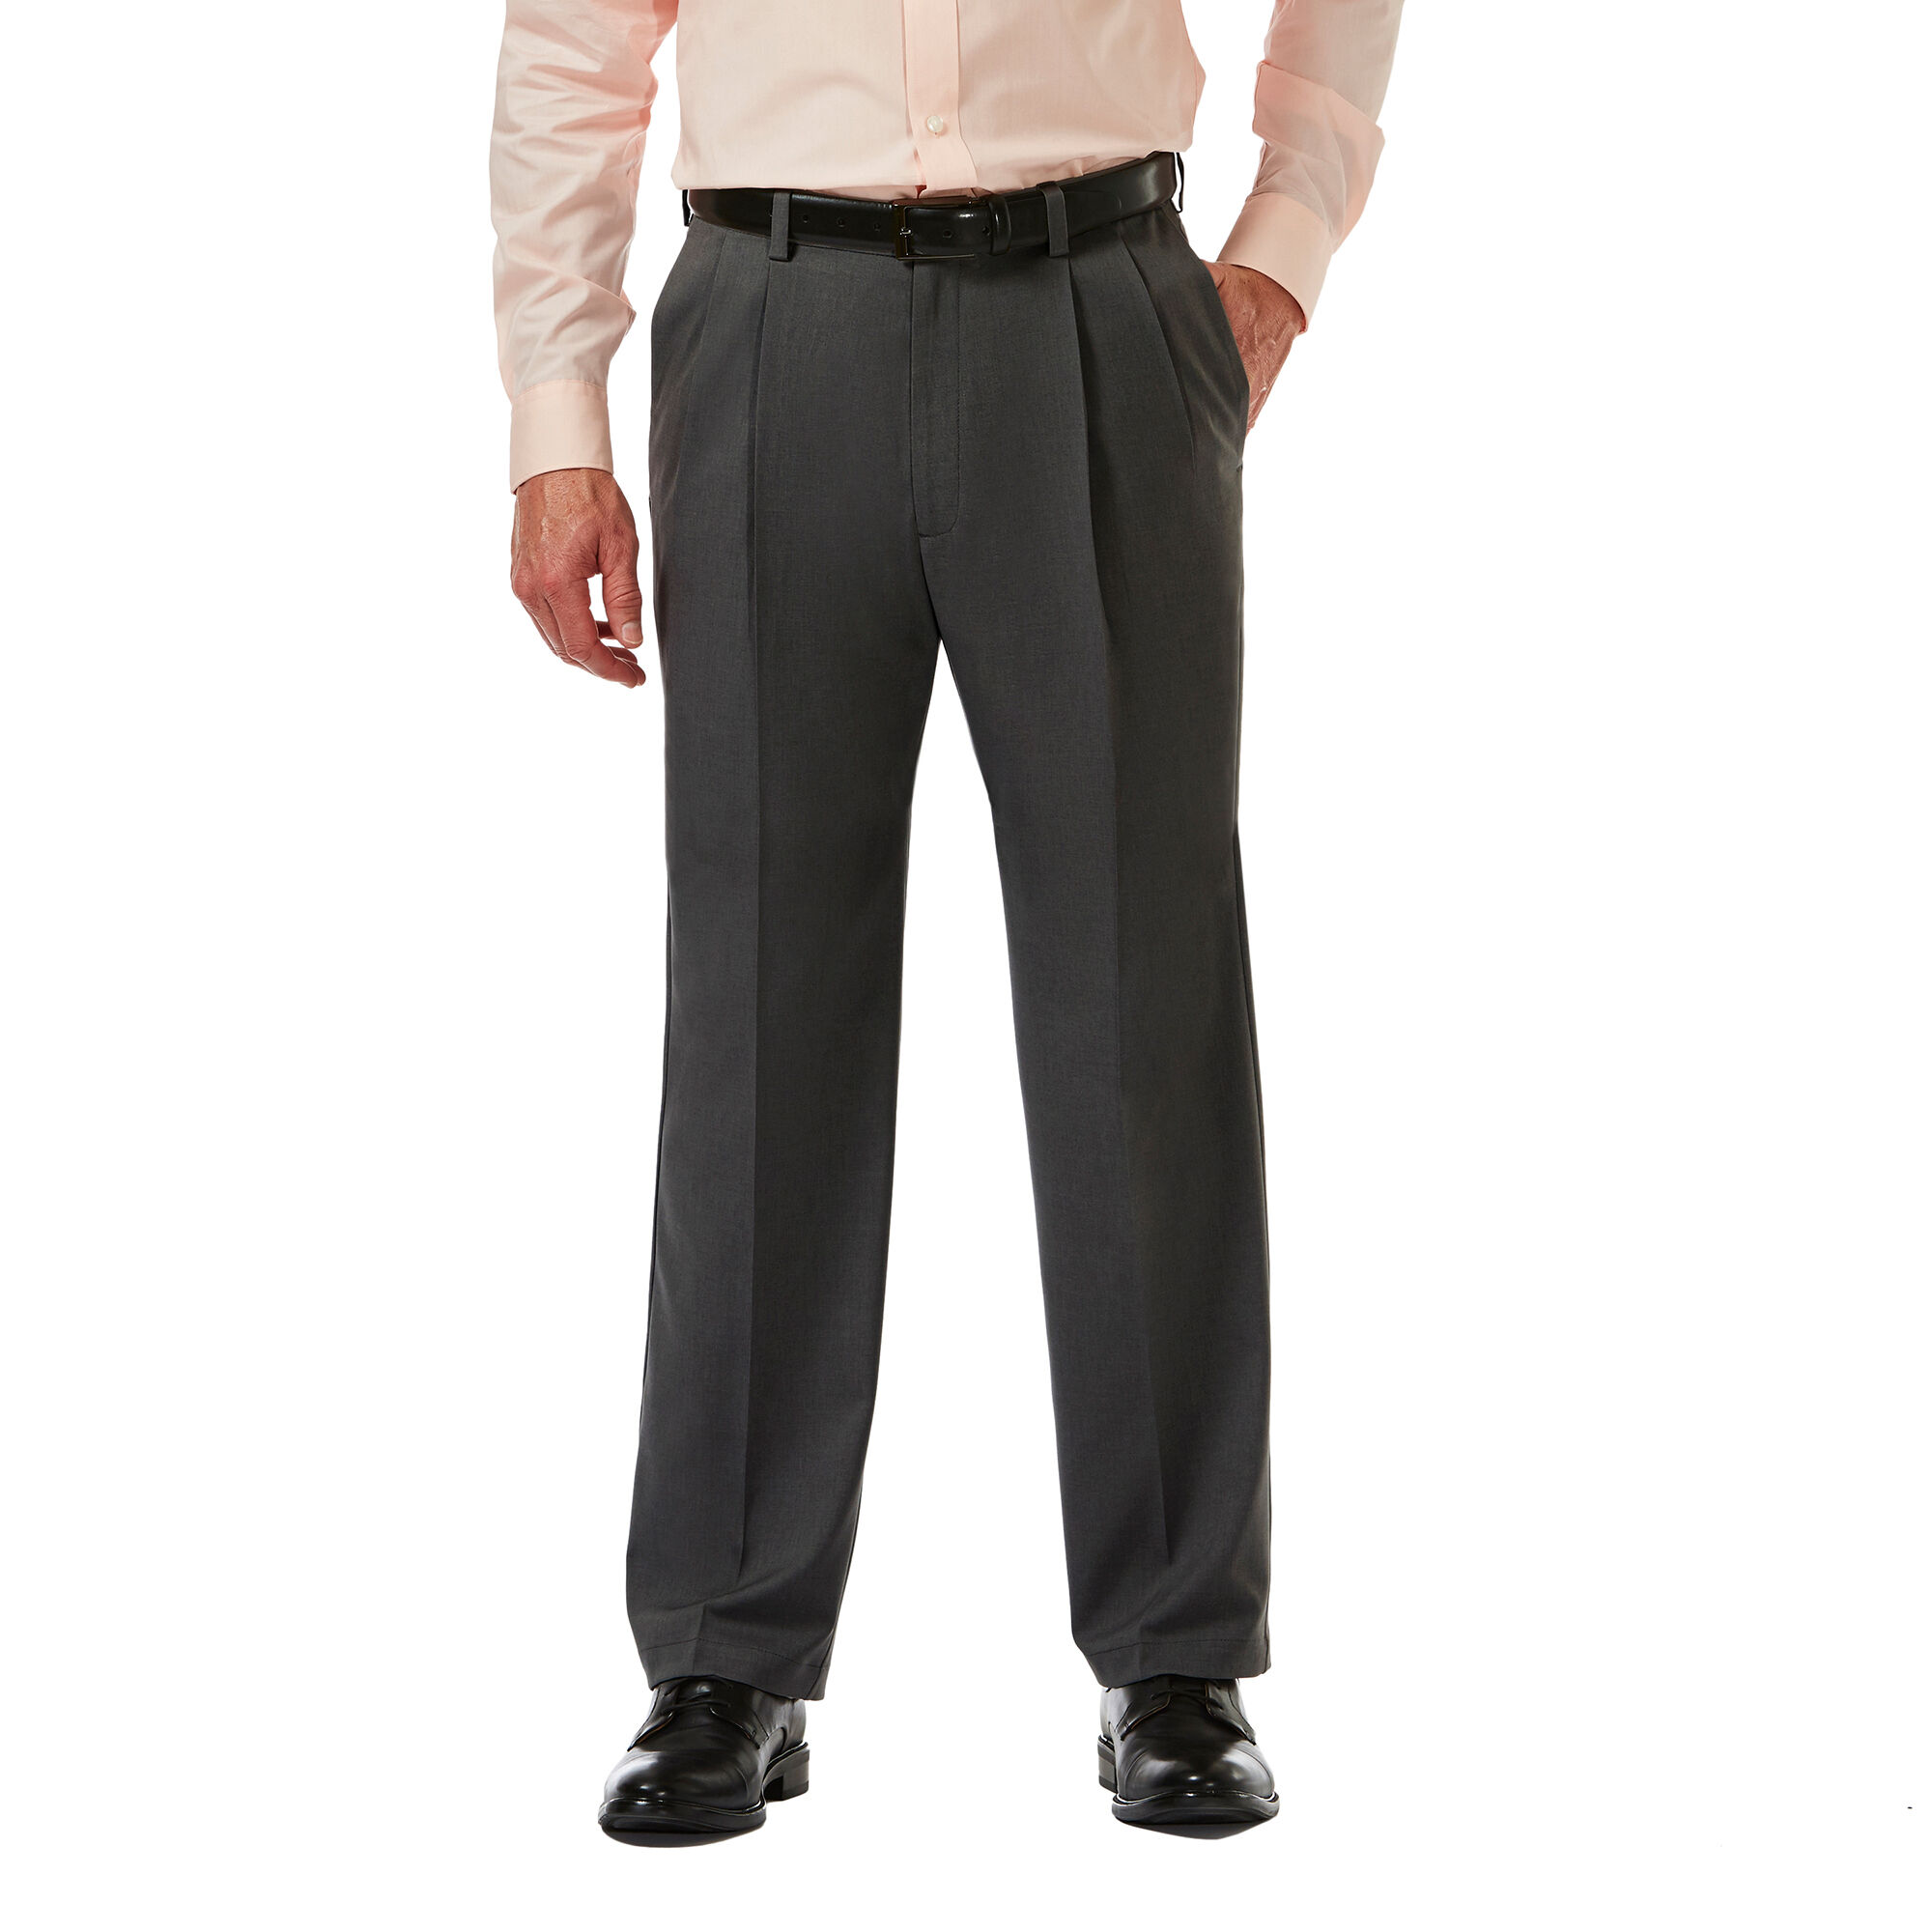 Cool 18 Pro Heather Pant | Classic Fit, Pleat Front, Stretch, No